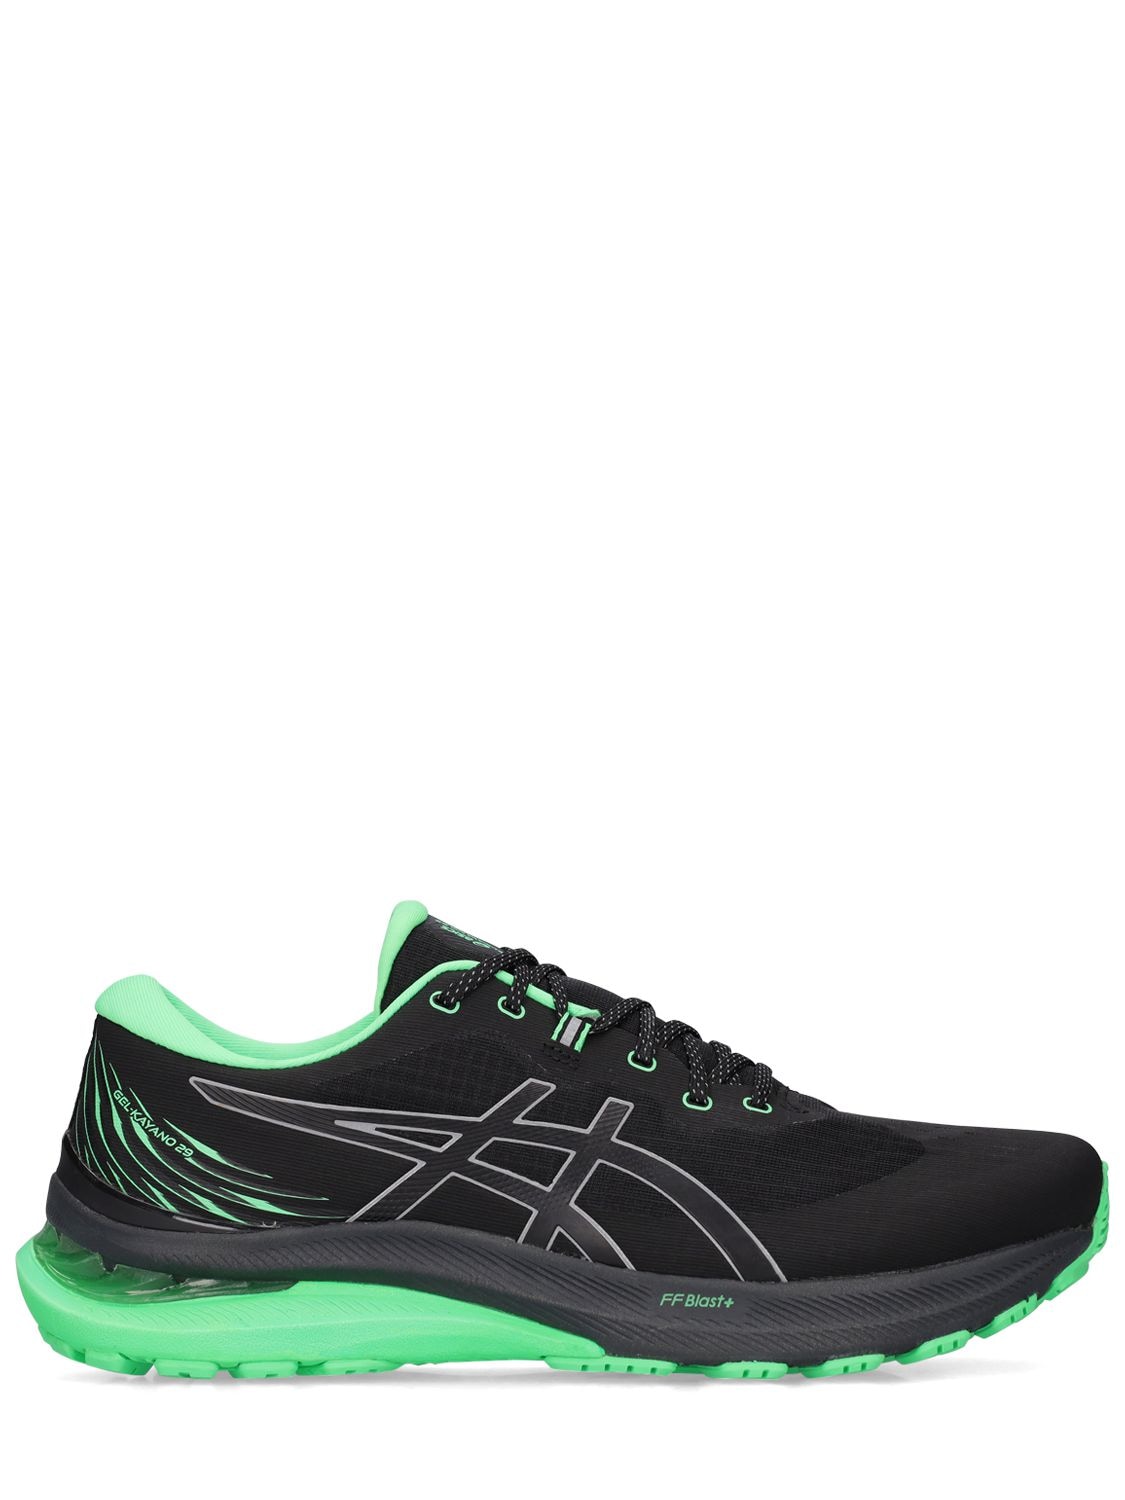 Gel-kayano 29 Sneakers | The Hoxton Trend